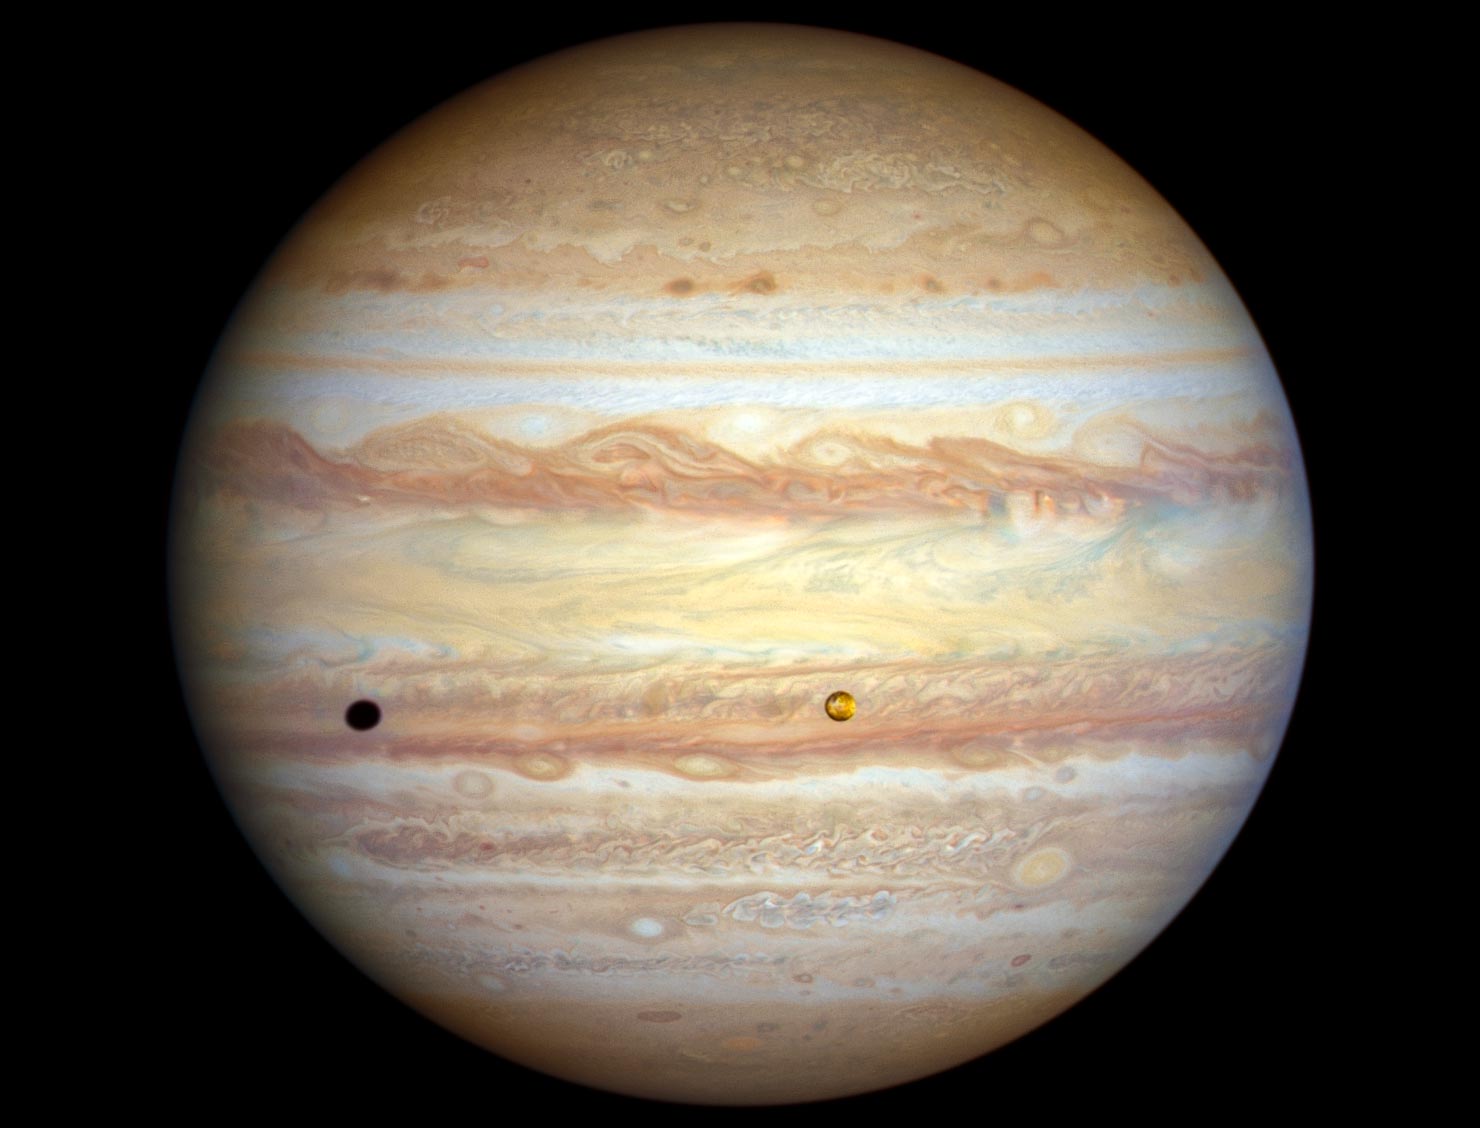 Hubble spies the amazingly changing seasons on Jupiter and Uranus